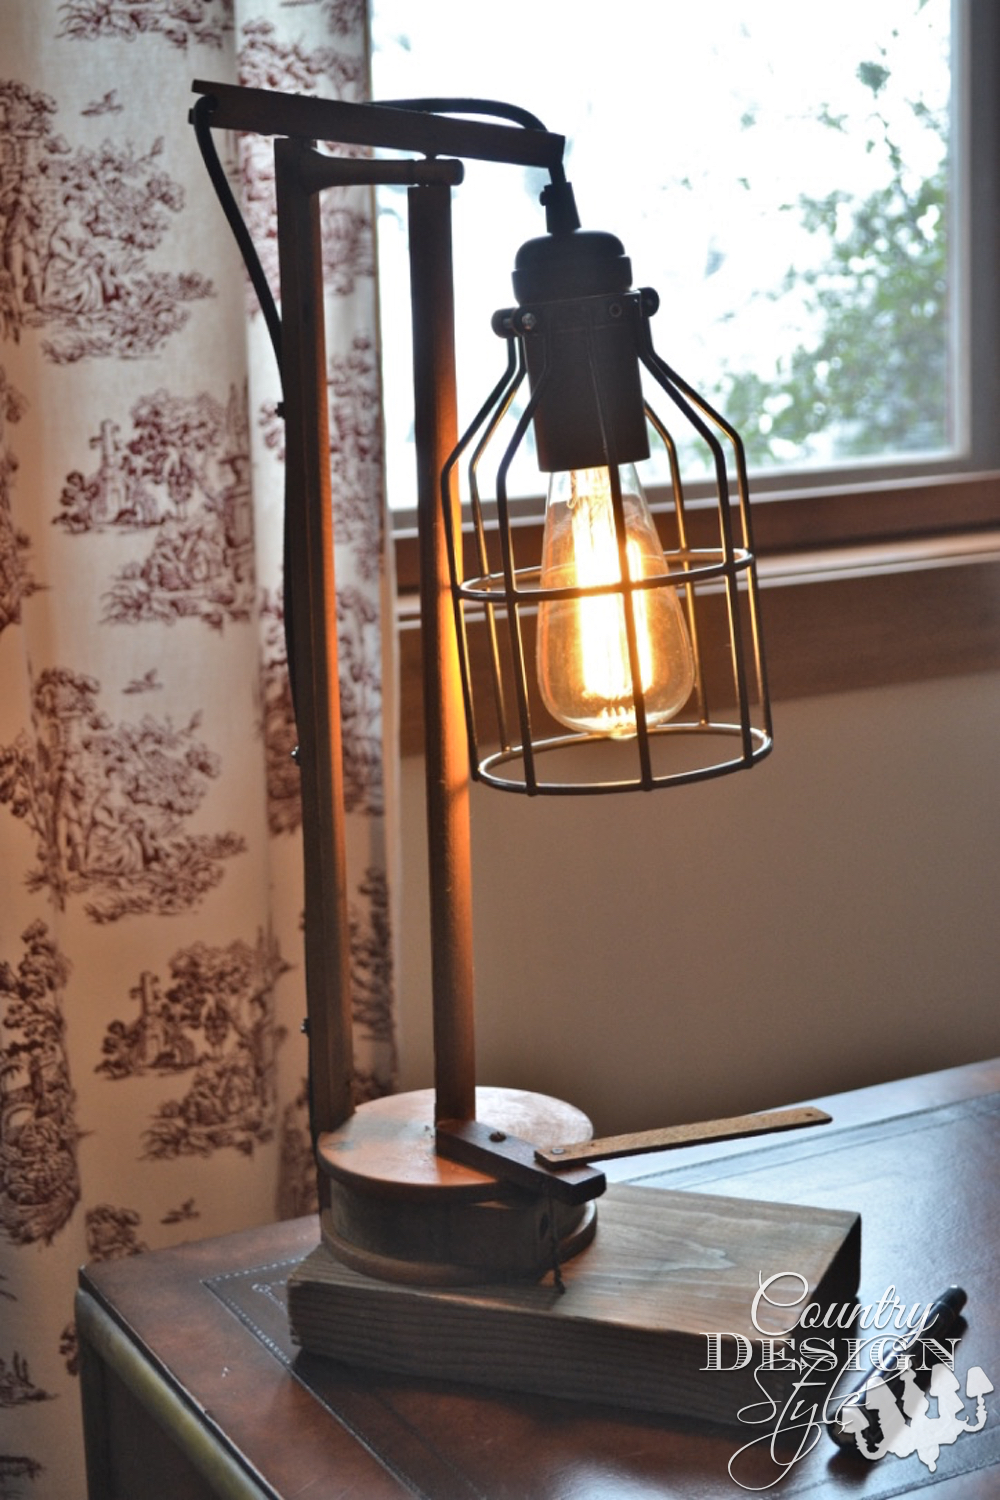 Vintage Organ Part Lamp | Country Design Style | countrydesignstyle.com